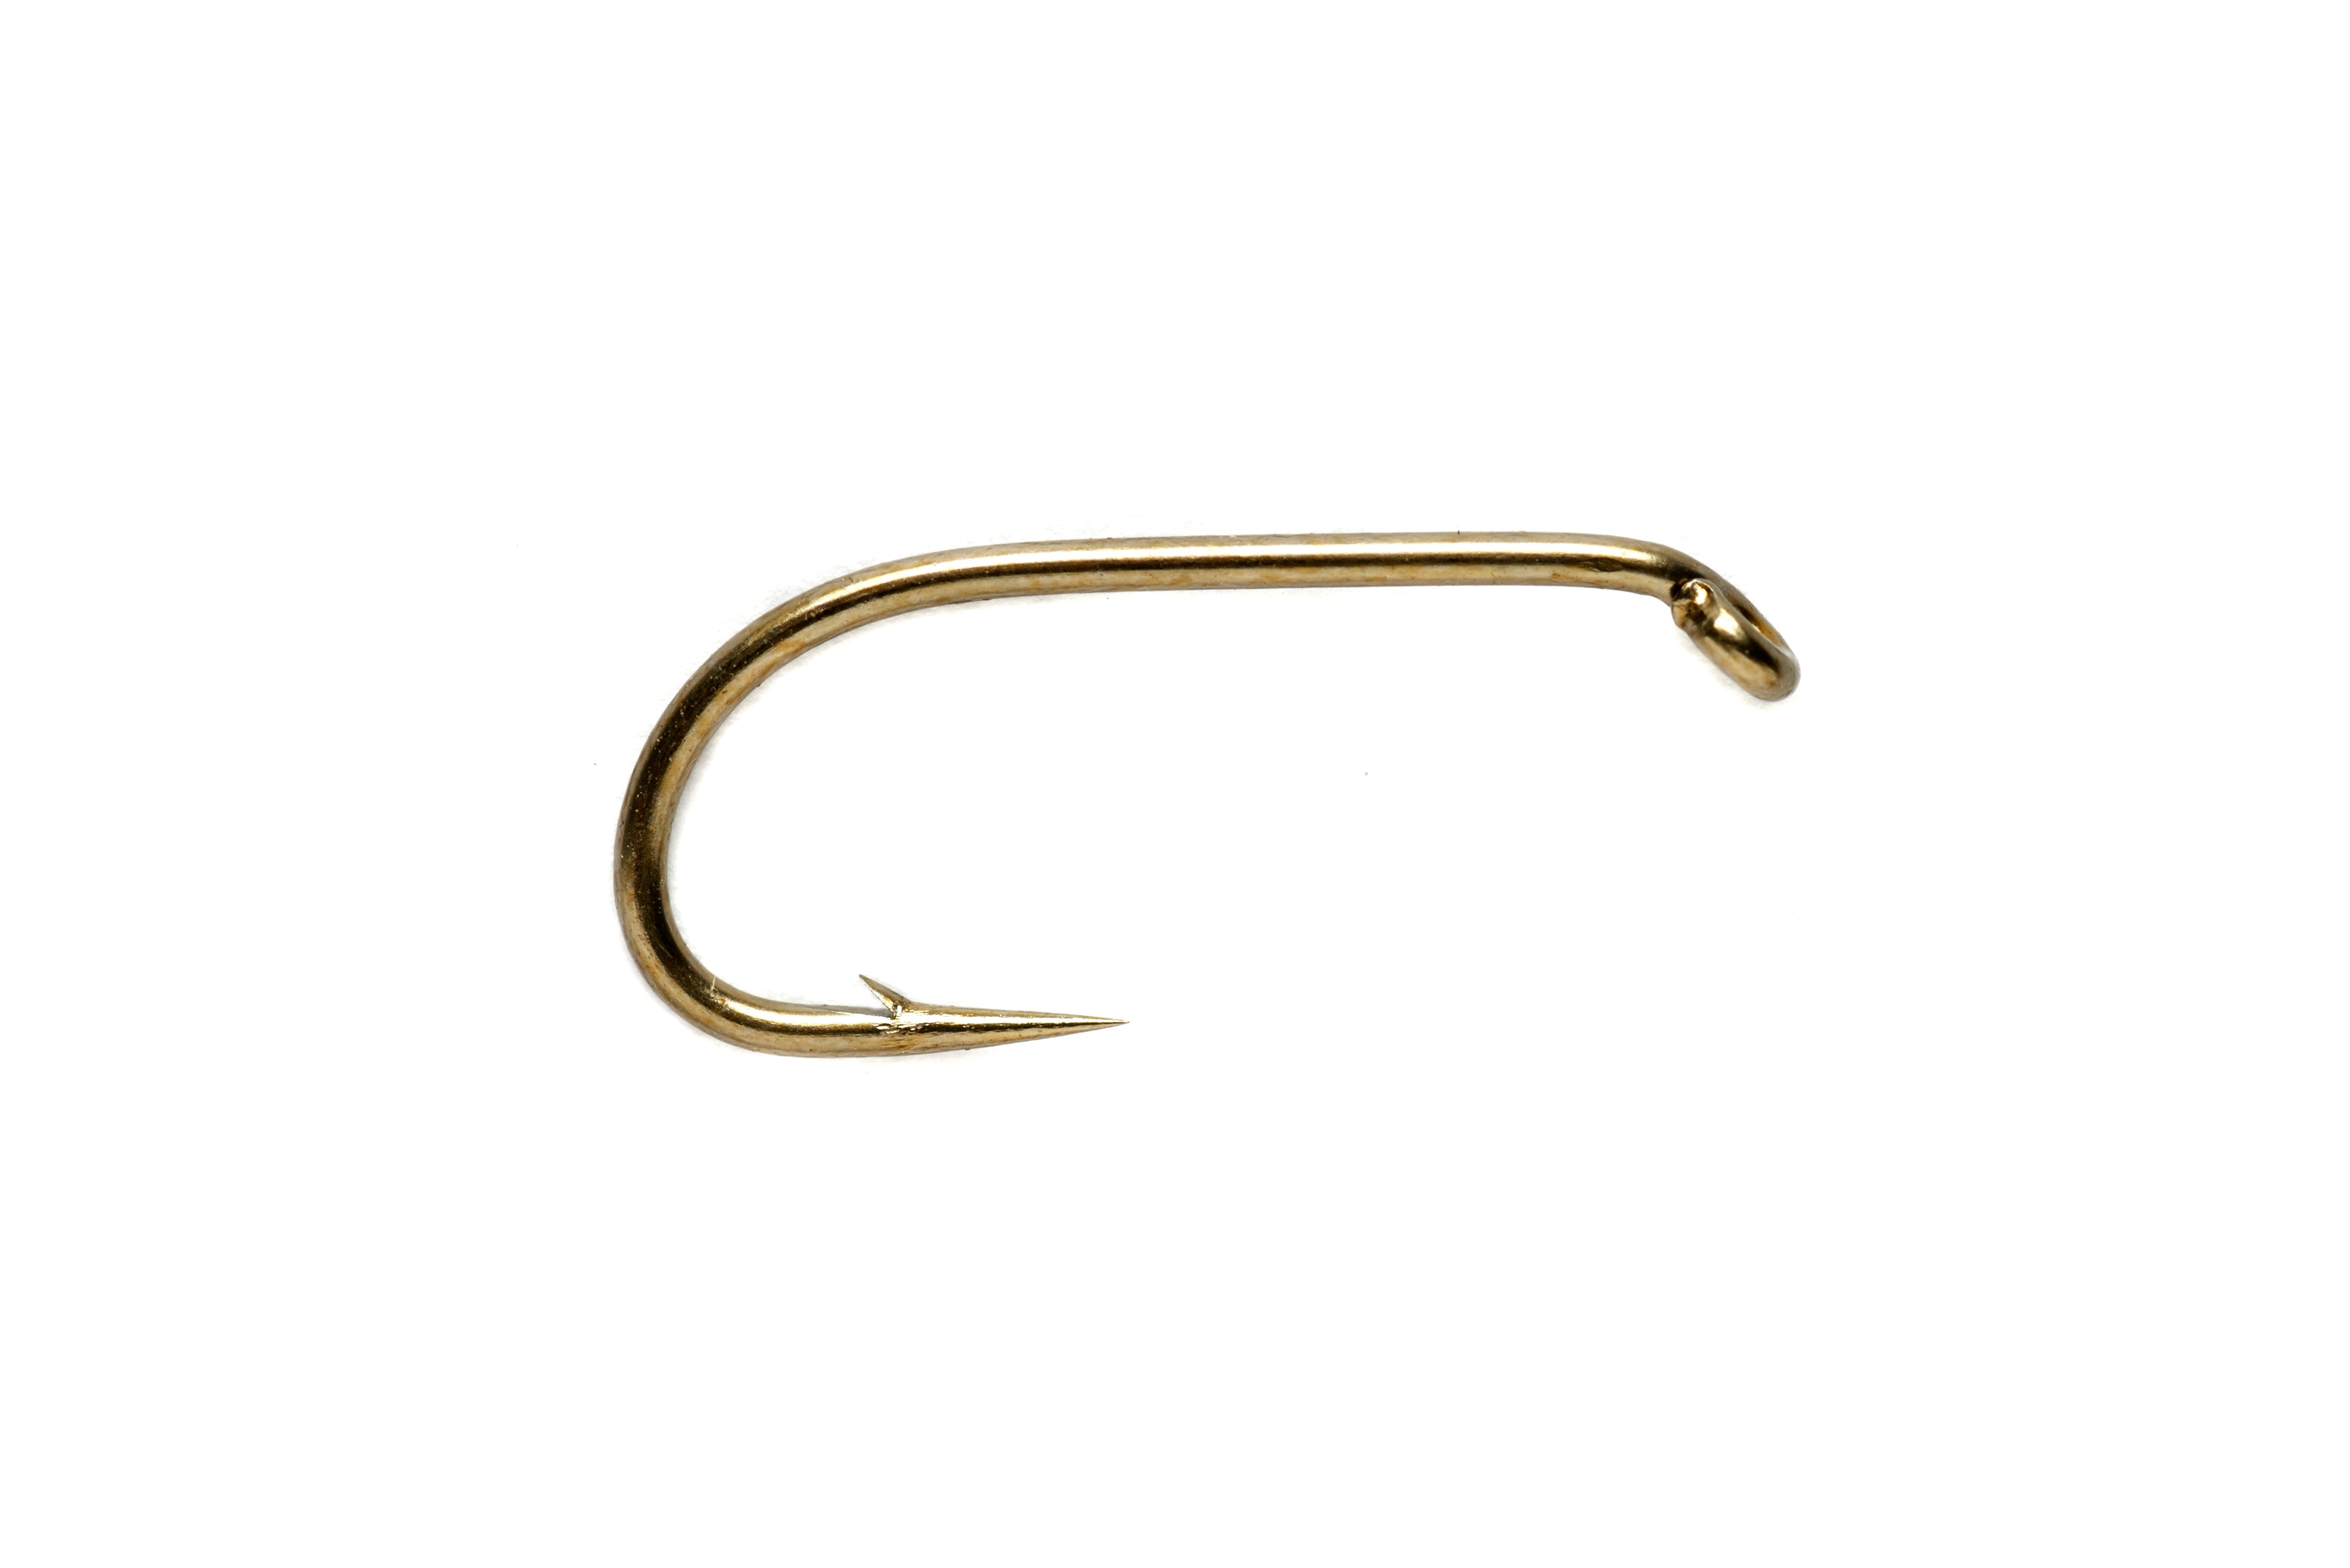 kamasan b175 trout hooks for bait or fly tying size 6 x 25 hooks.our most  popula 